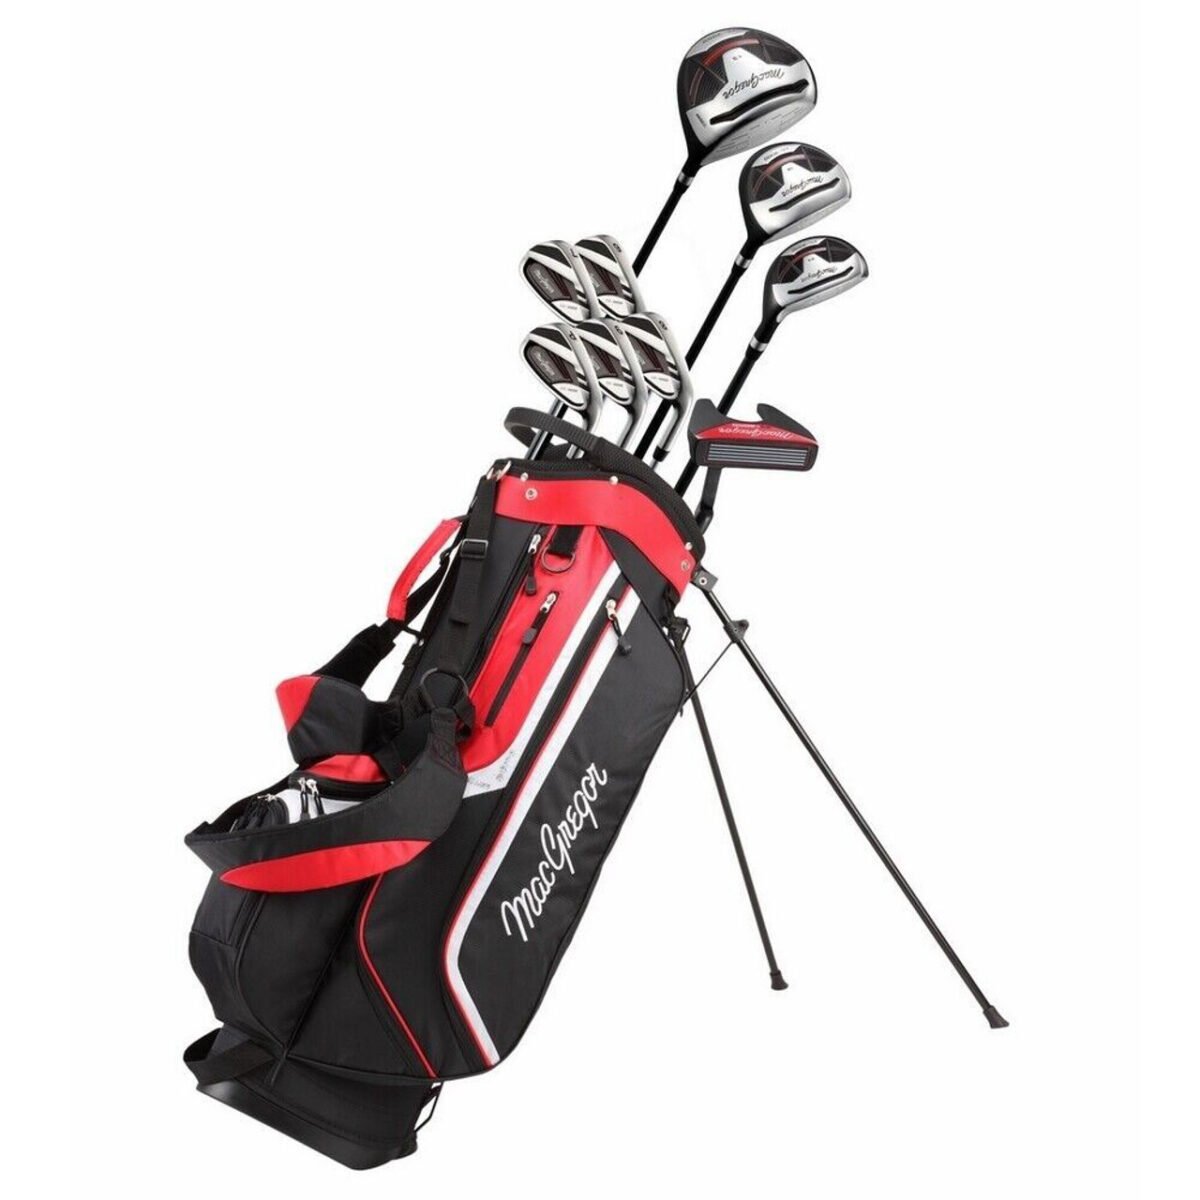 Golf Club Sets: A Comparative Review of 5 Products